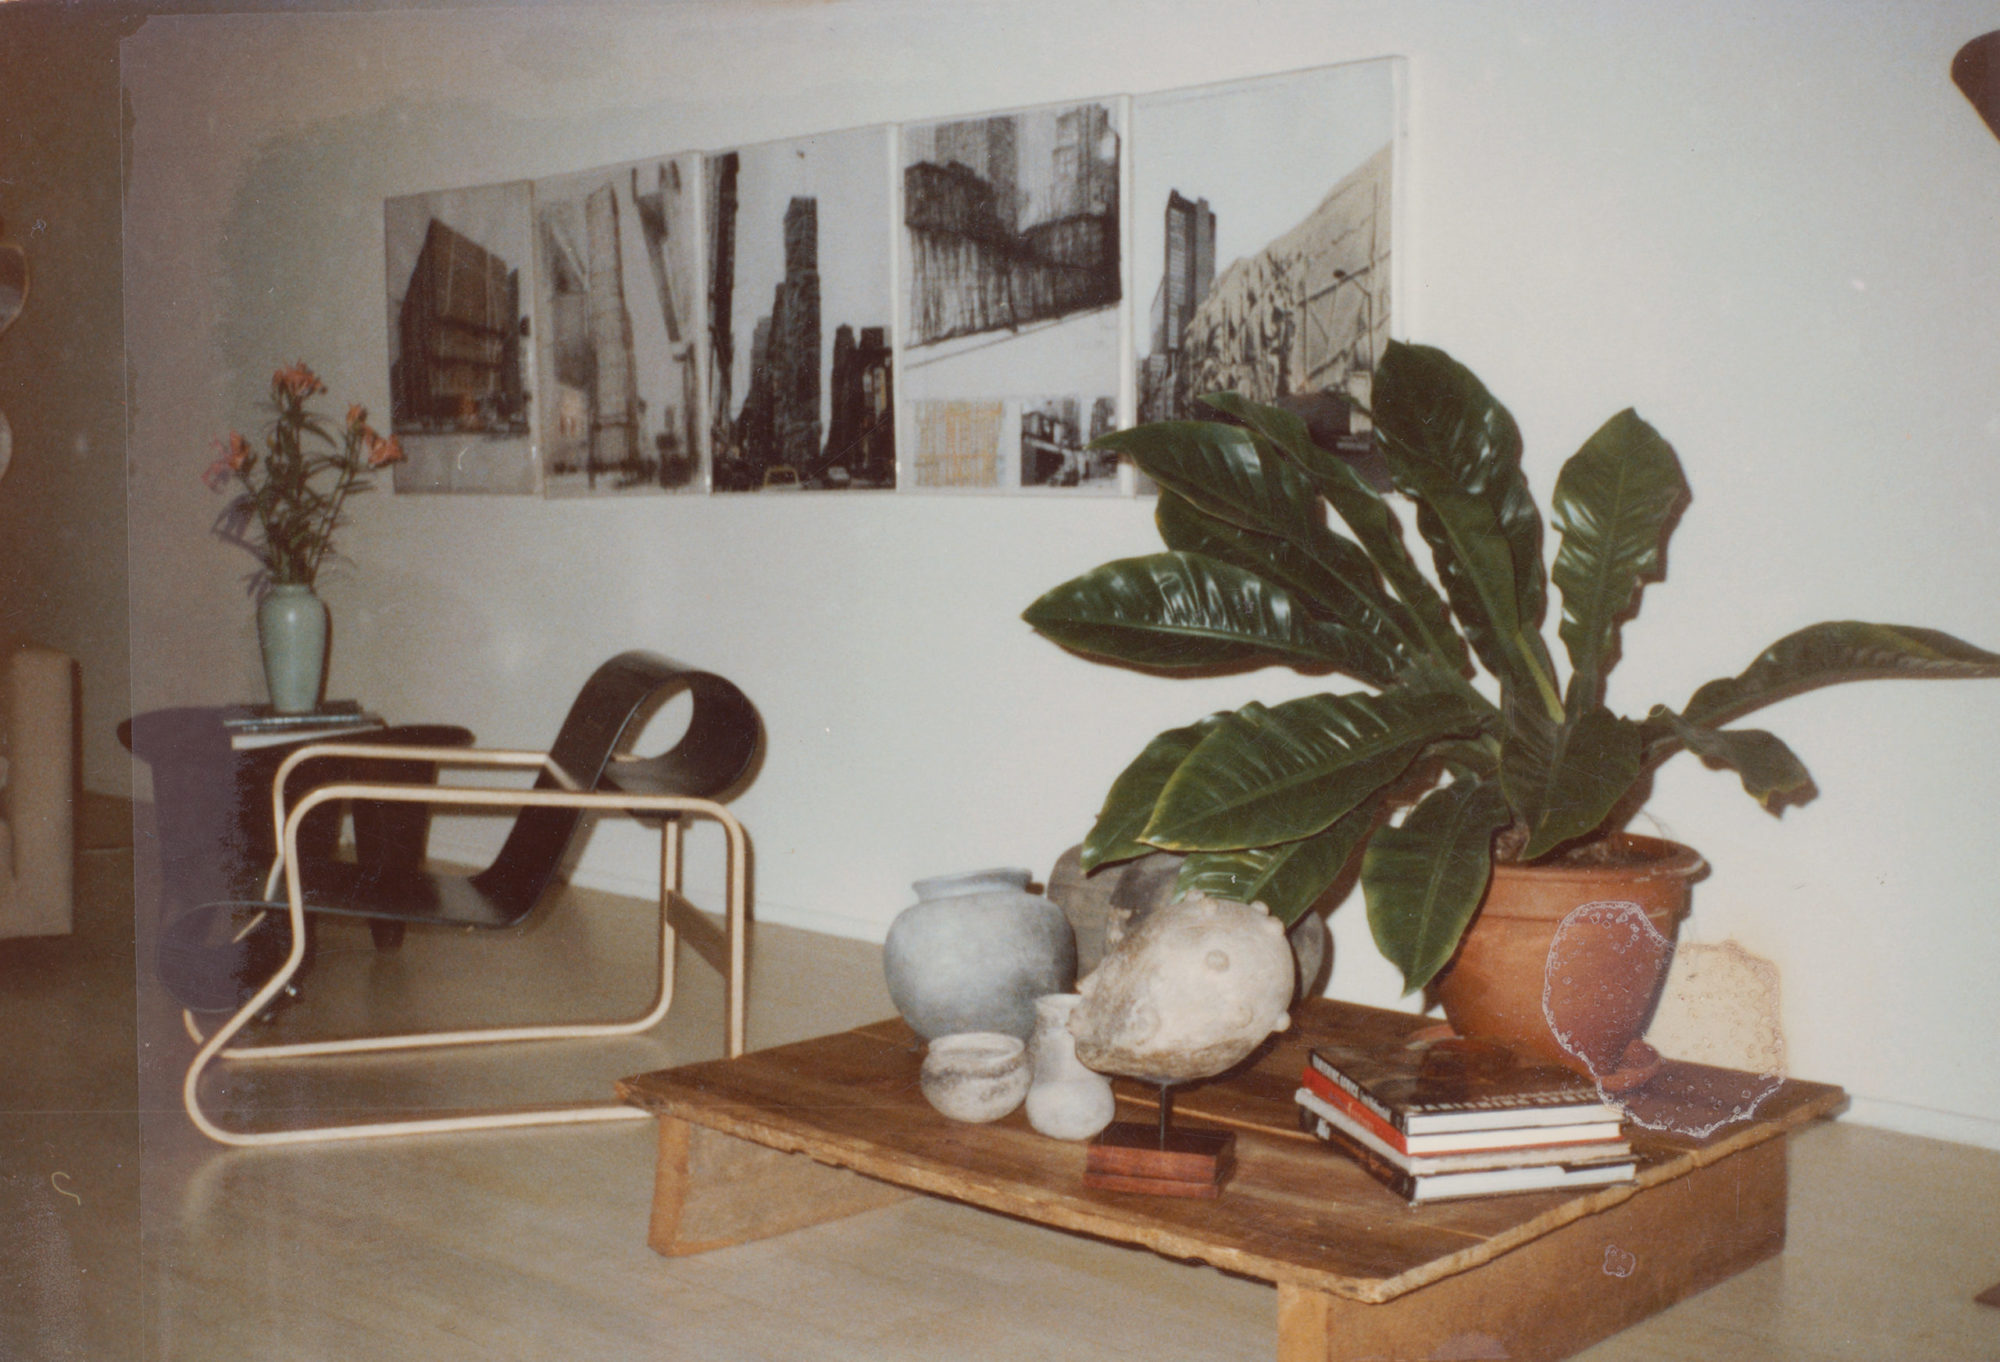 An interior photograph of a home. A low table sits on the floor on the right of the image. A large plant, books, pots, and sculpture of a figure's head sit on the table. To the left of the table is a geometric chair. On the wall behind it is a row of large drawings of buildings.